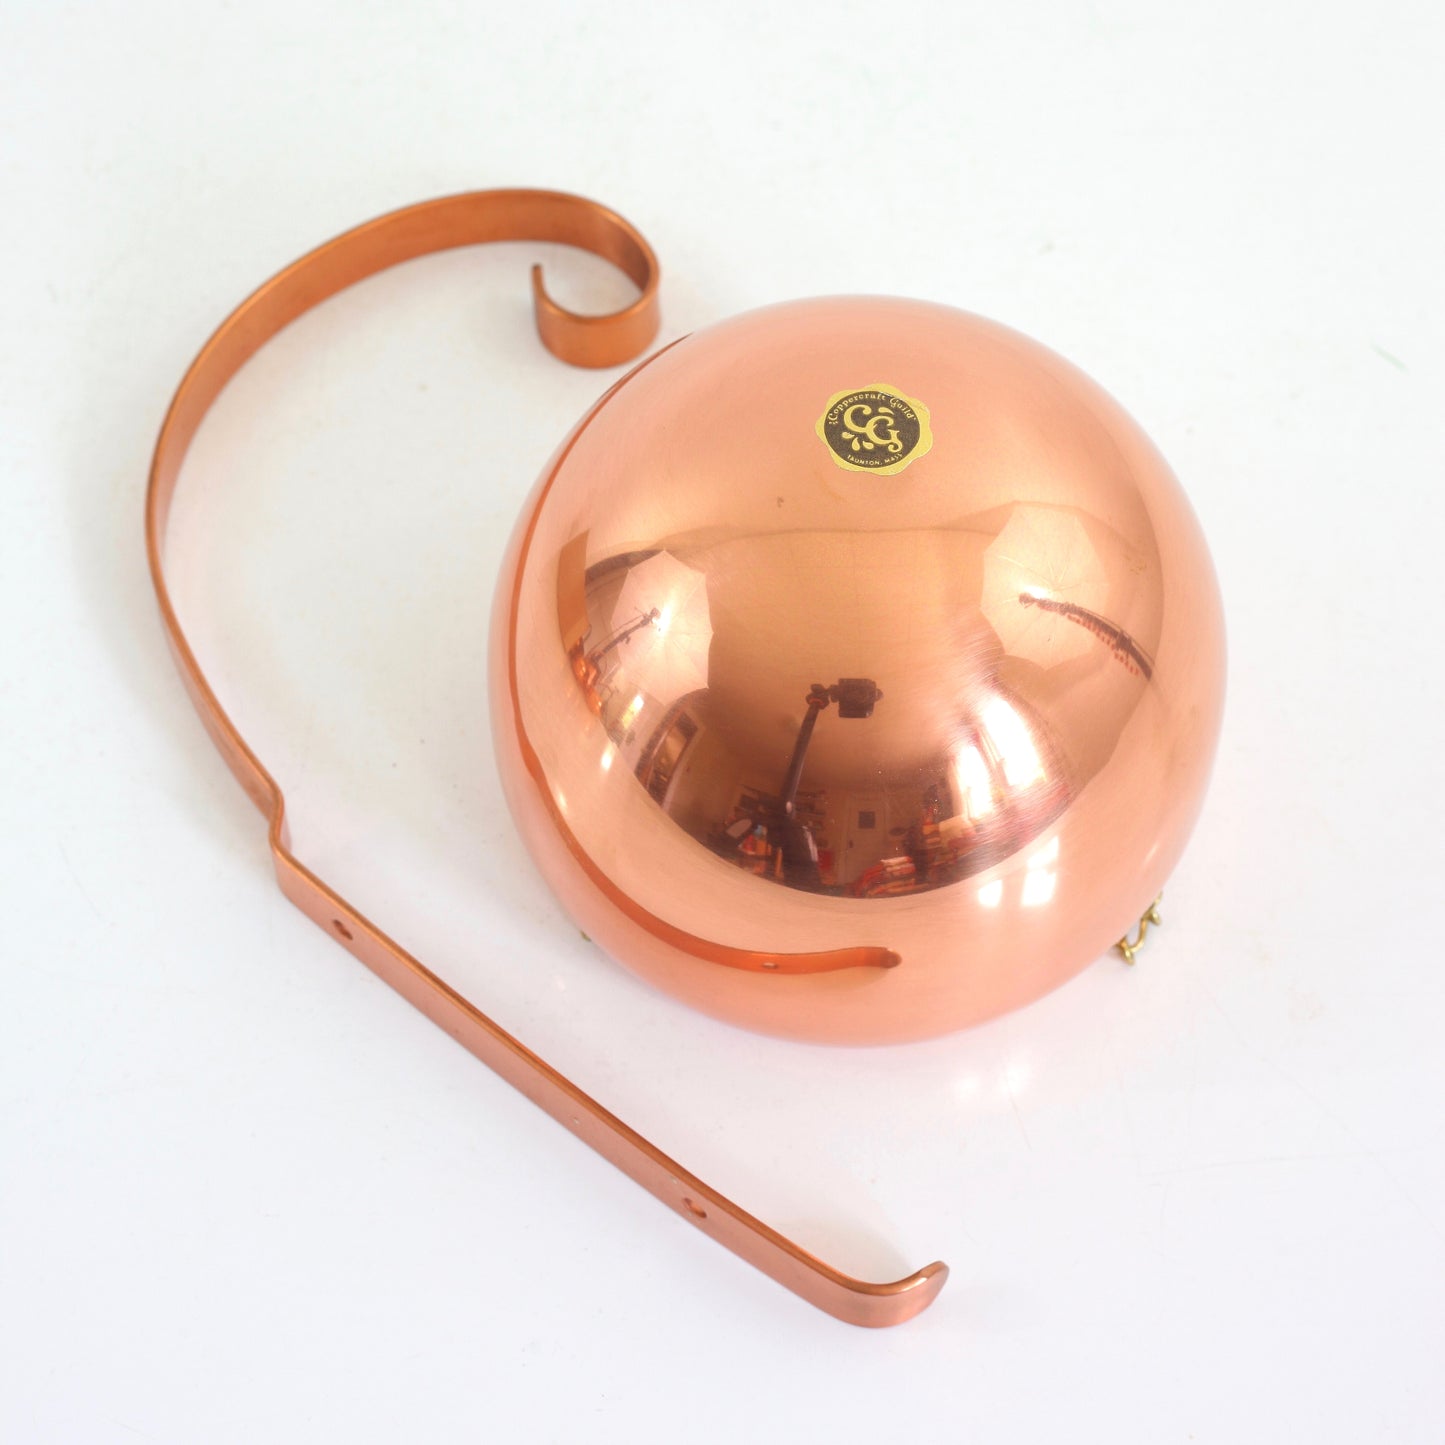 SOLD - Large Hanging Copper Planter by Coppercraft Guild